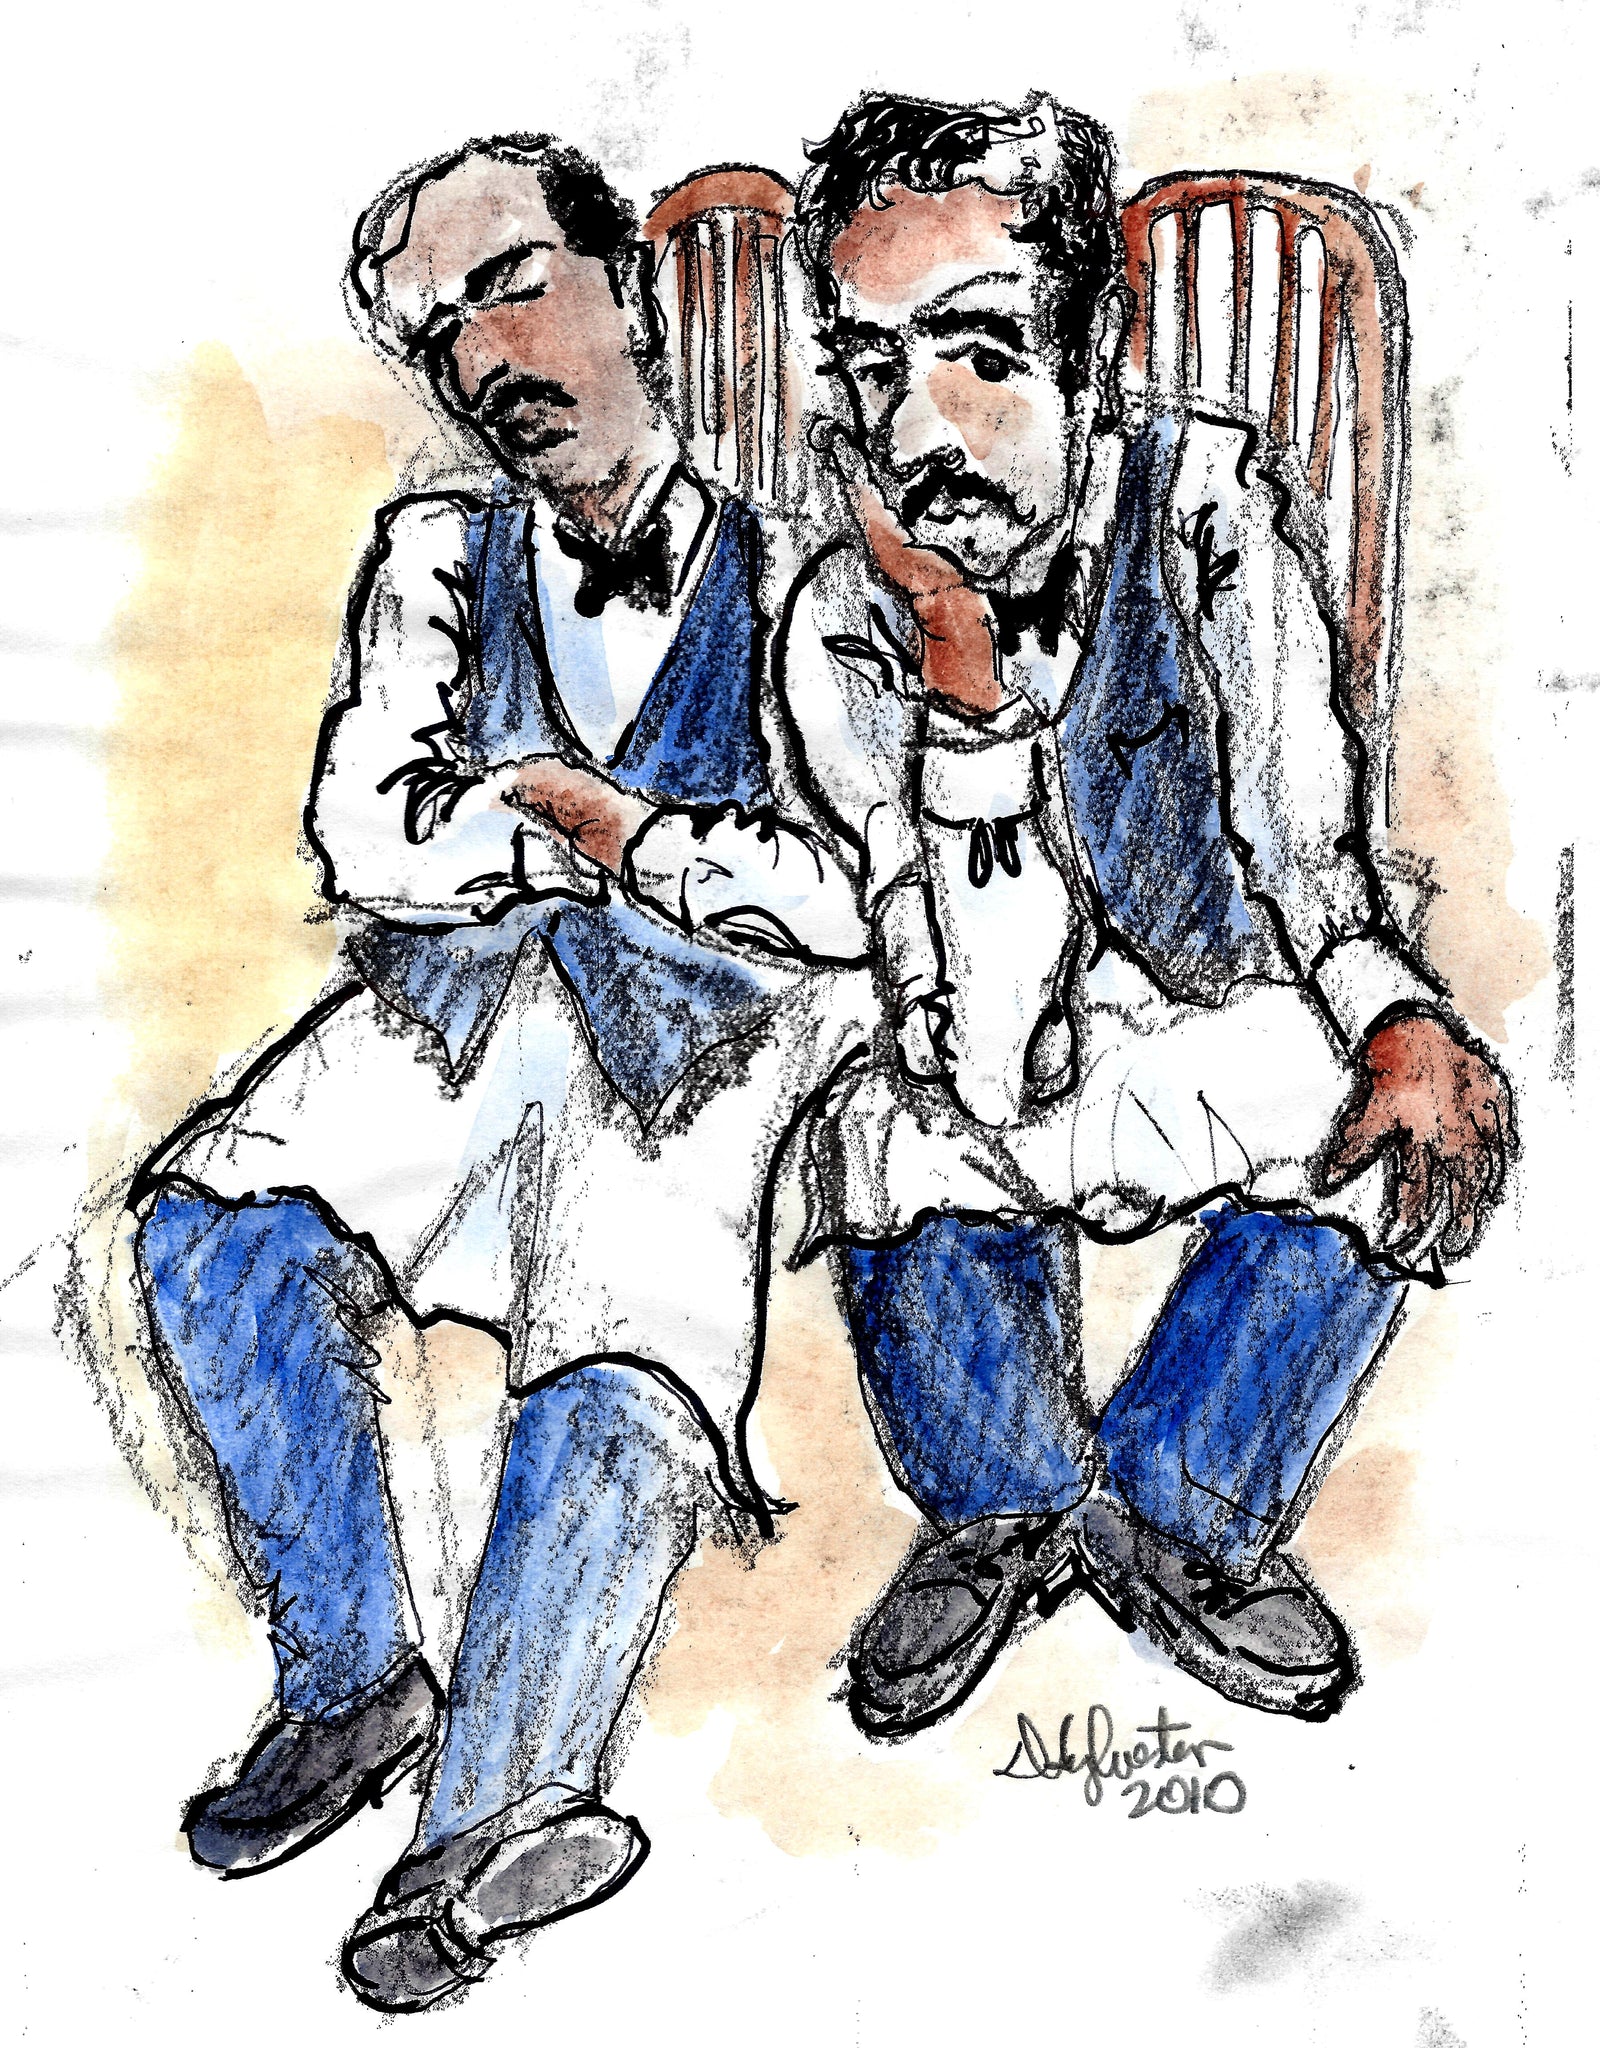 WAITERS - TWO WAITERS AT REST